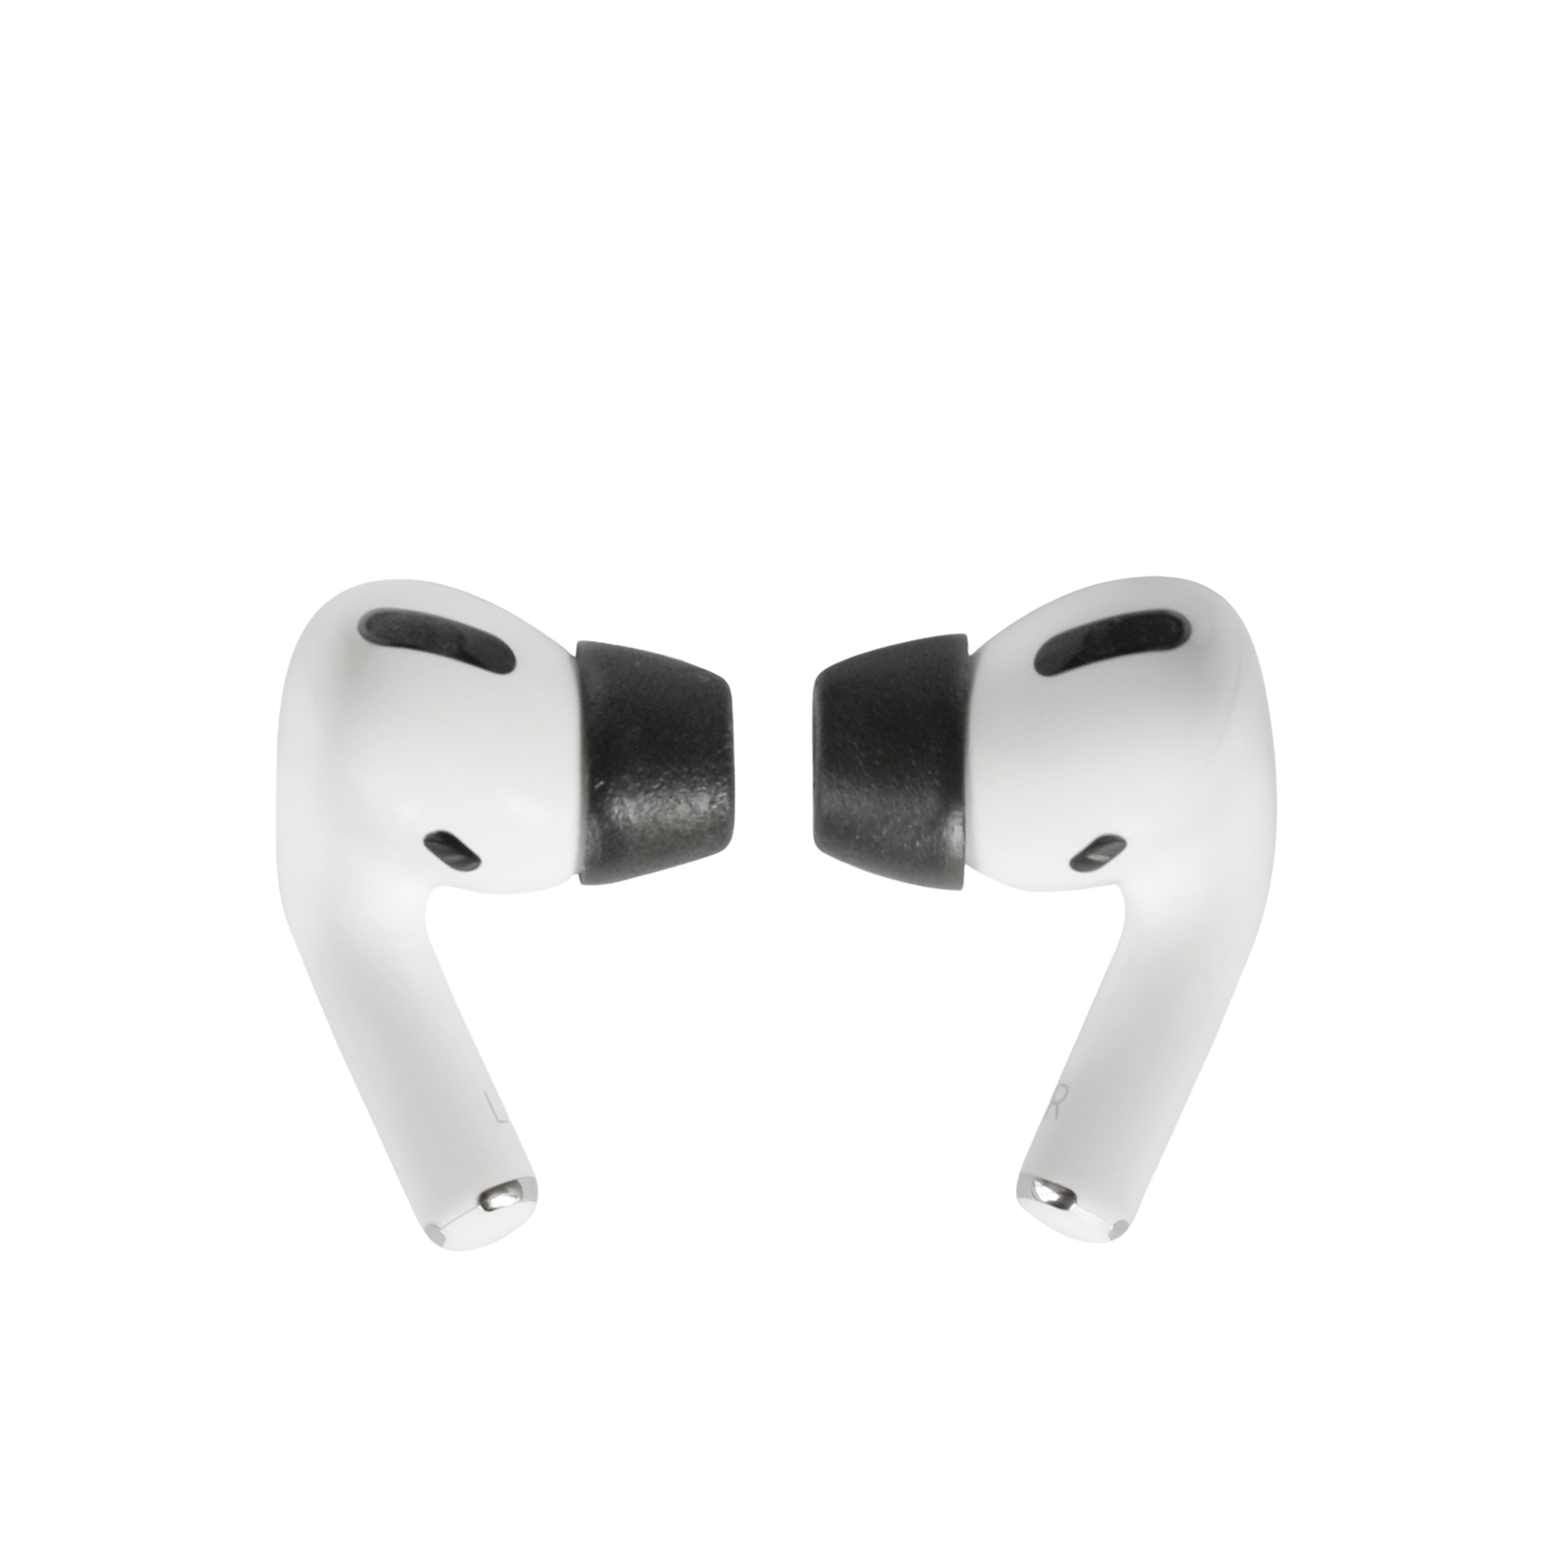 Comply Foam Tips 2.0 Compatible with AirPods Pro - Assorted Sizes (3 Pairs) - Discontinued